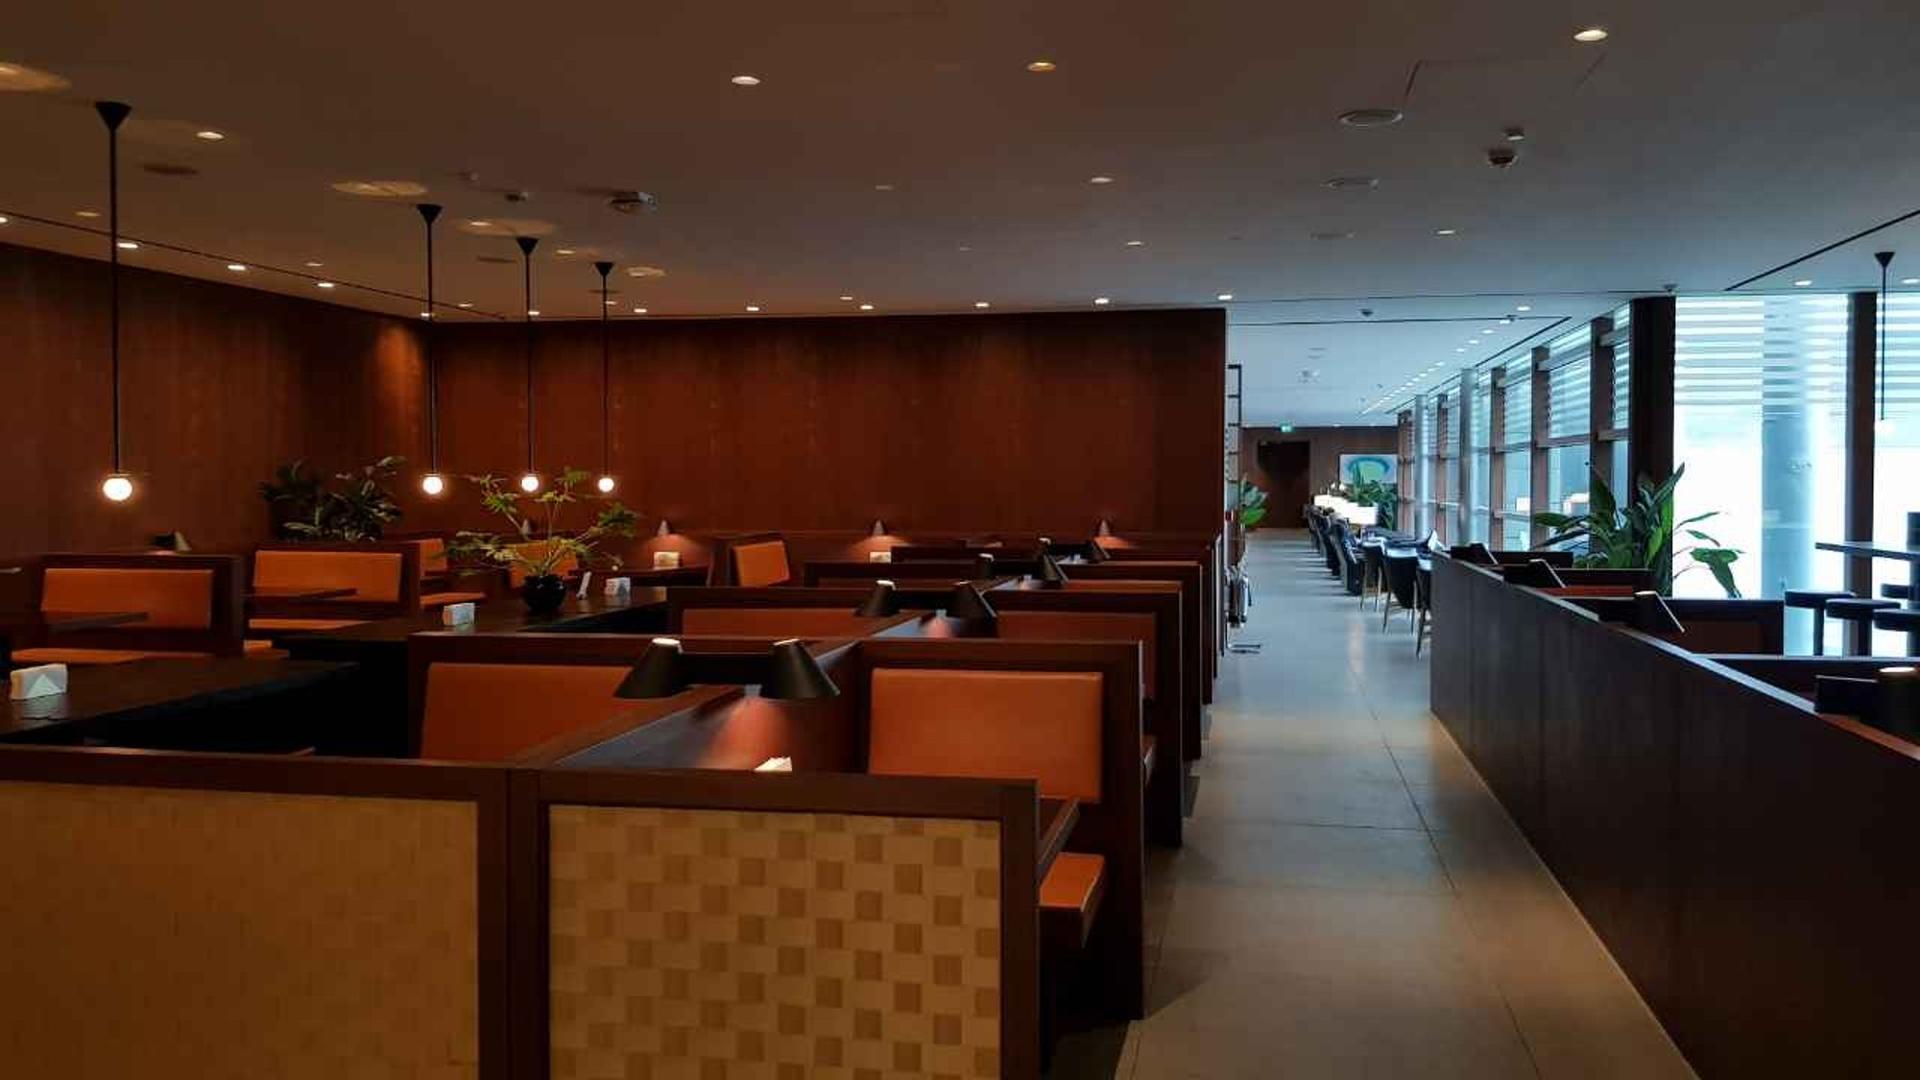 Cathay Pacific Business Class Lounge image 8 of 48